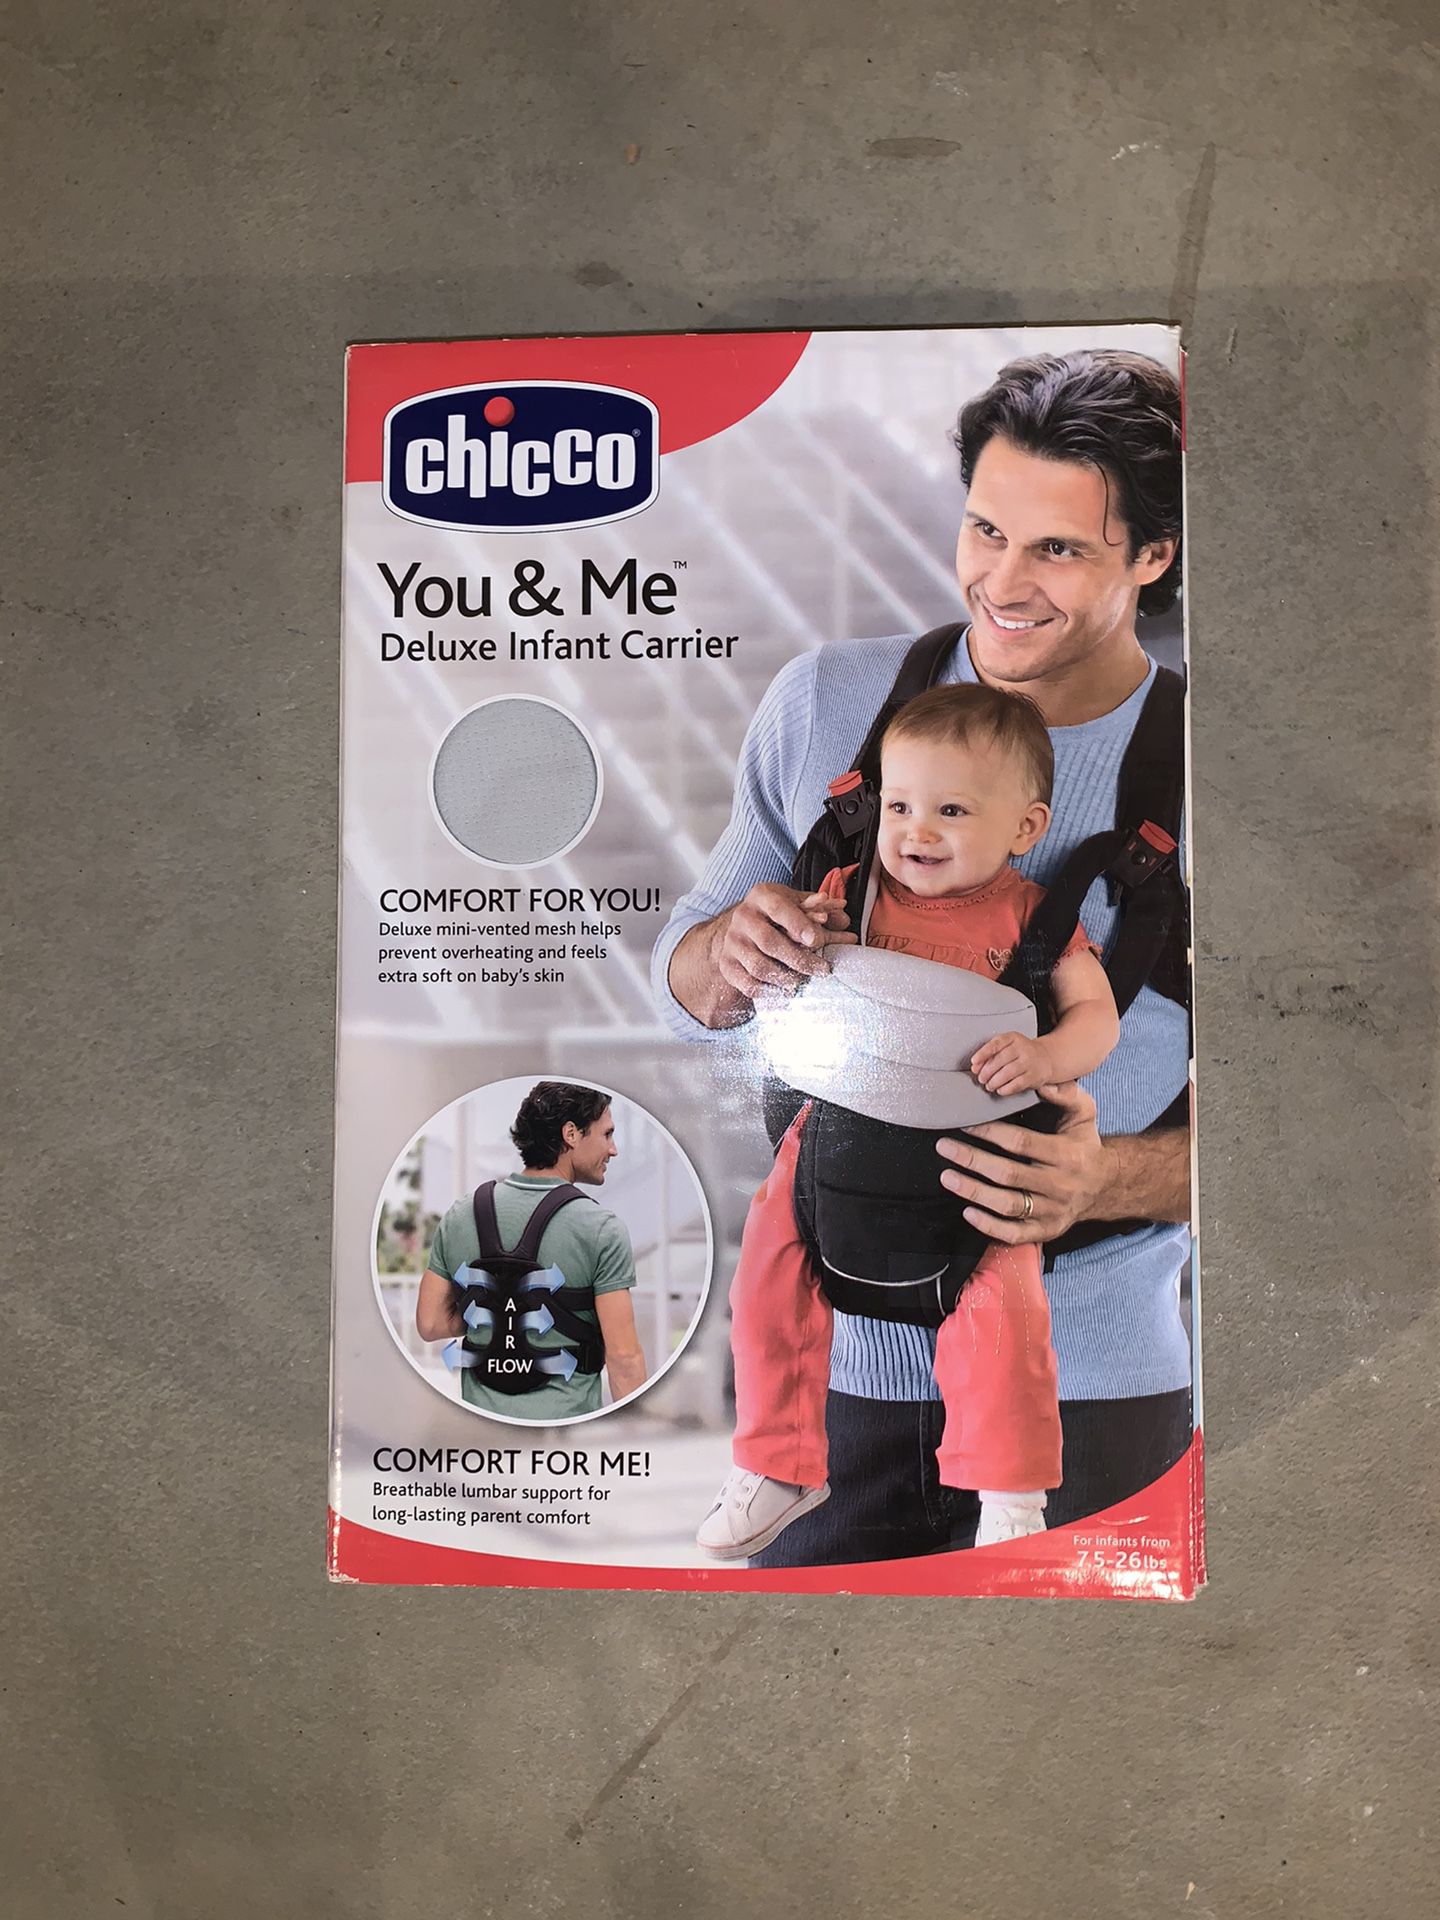 Chico You & Me Deluxe Infant Carrier